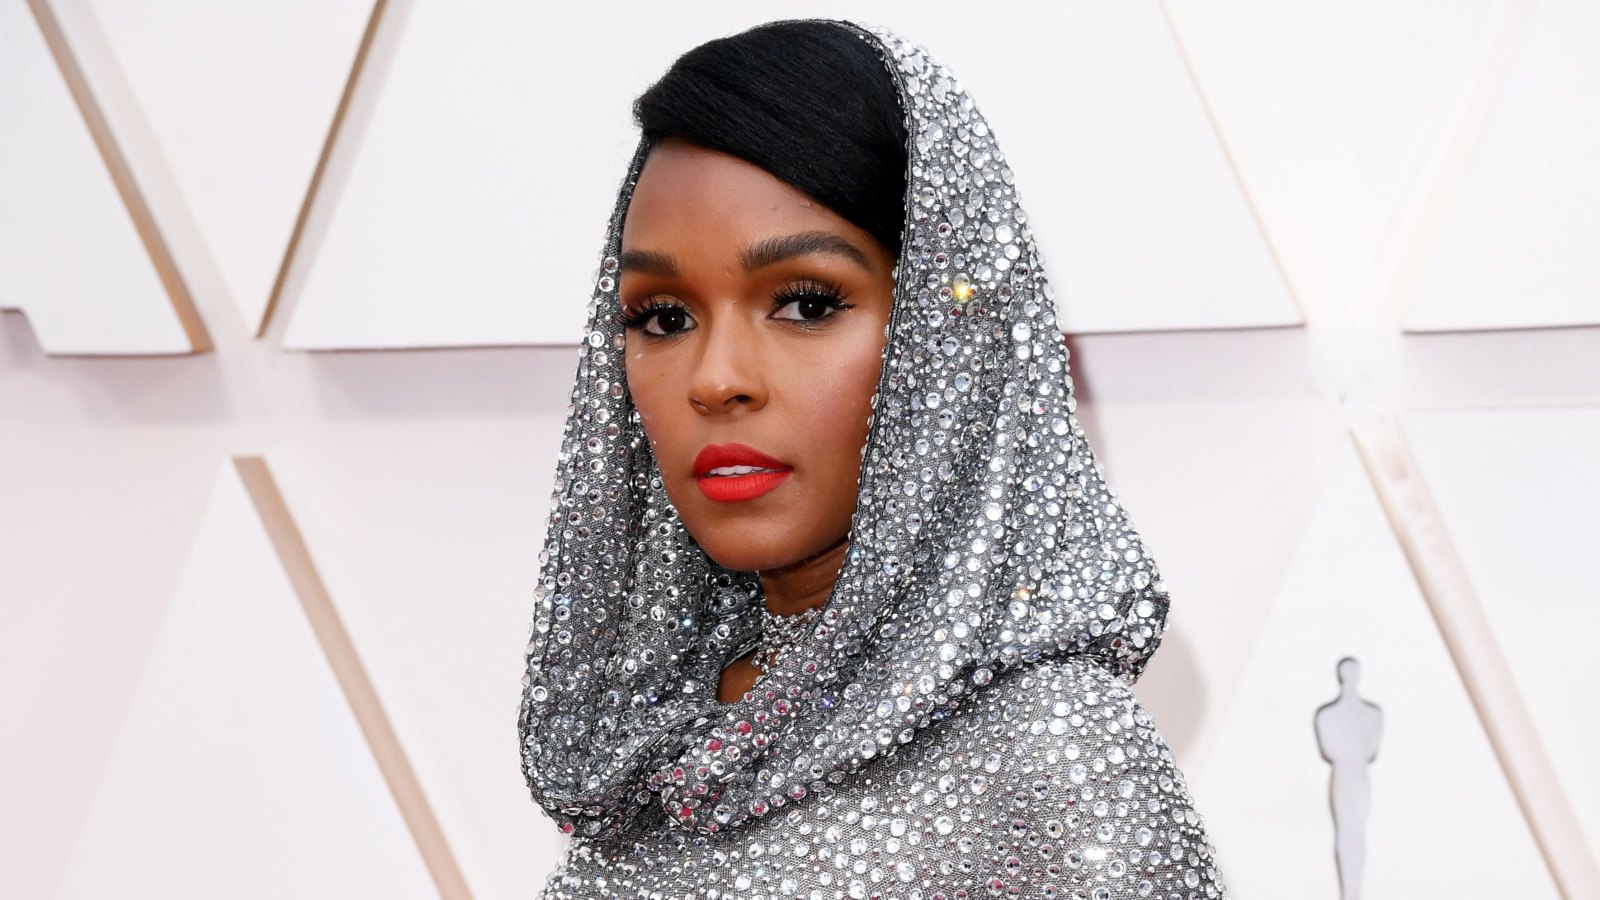 Janelle Monae attends the 92nd Annual Academy Awards in Los Angeles.